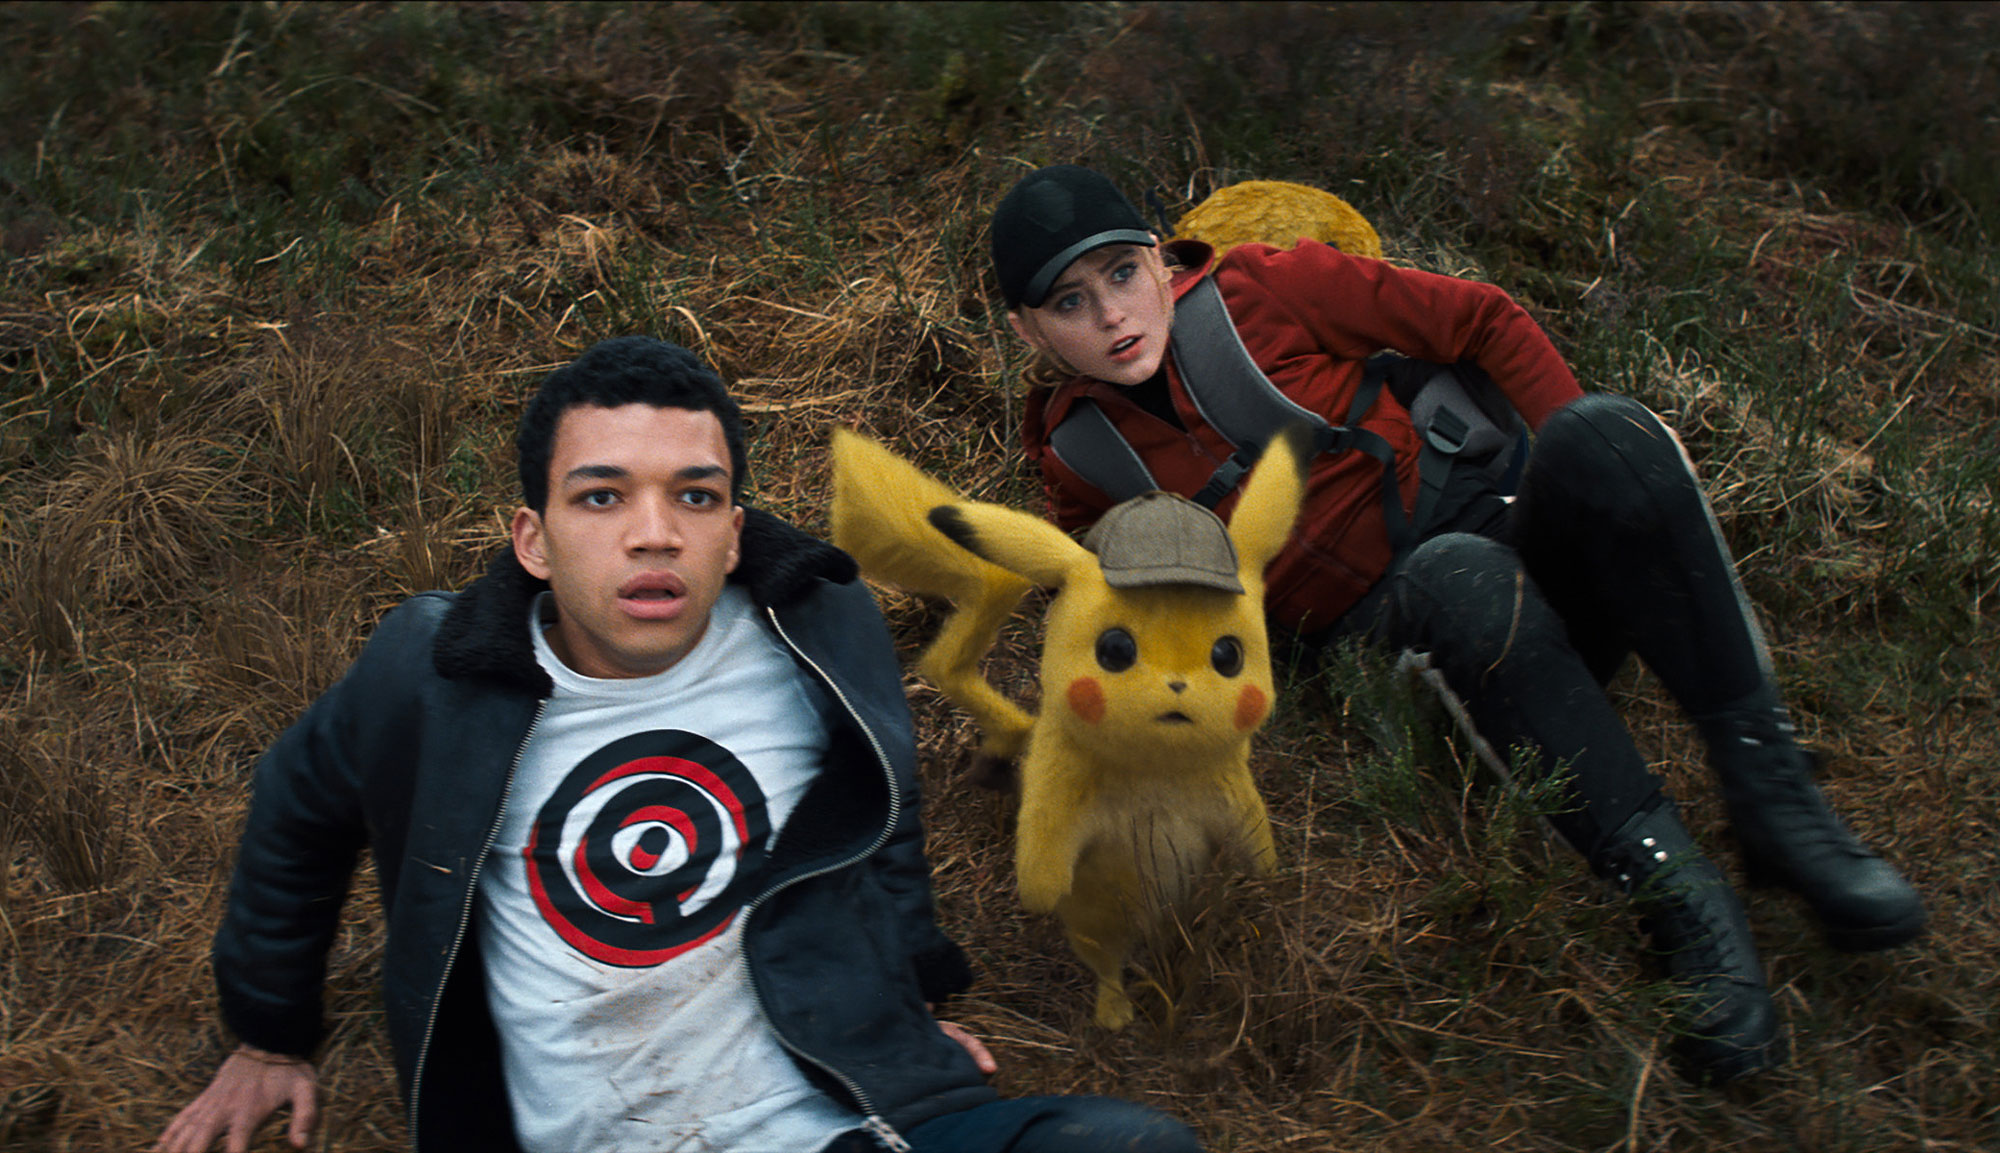 Justice Smith and Kathryn Newton in "Pokémon: Detective Pikachu"